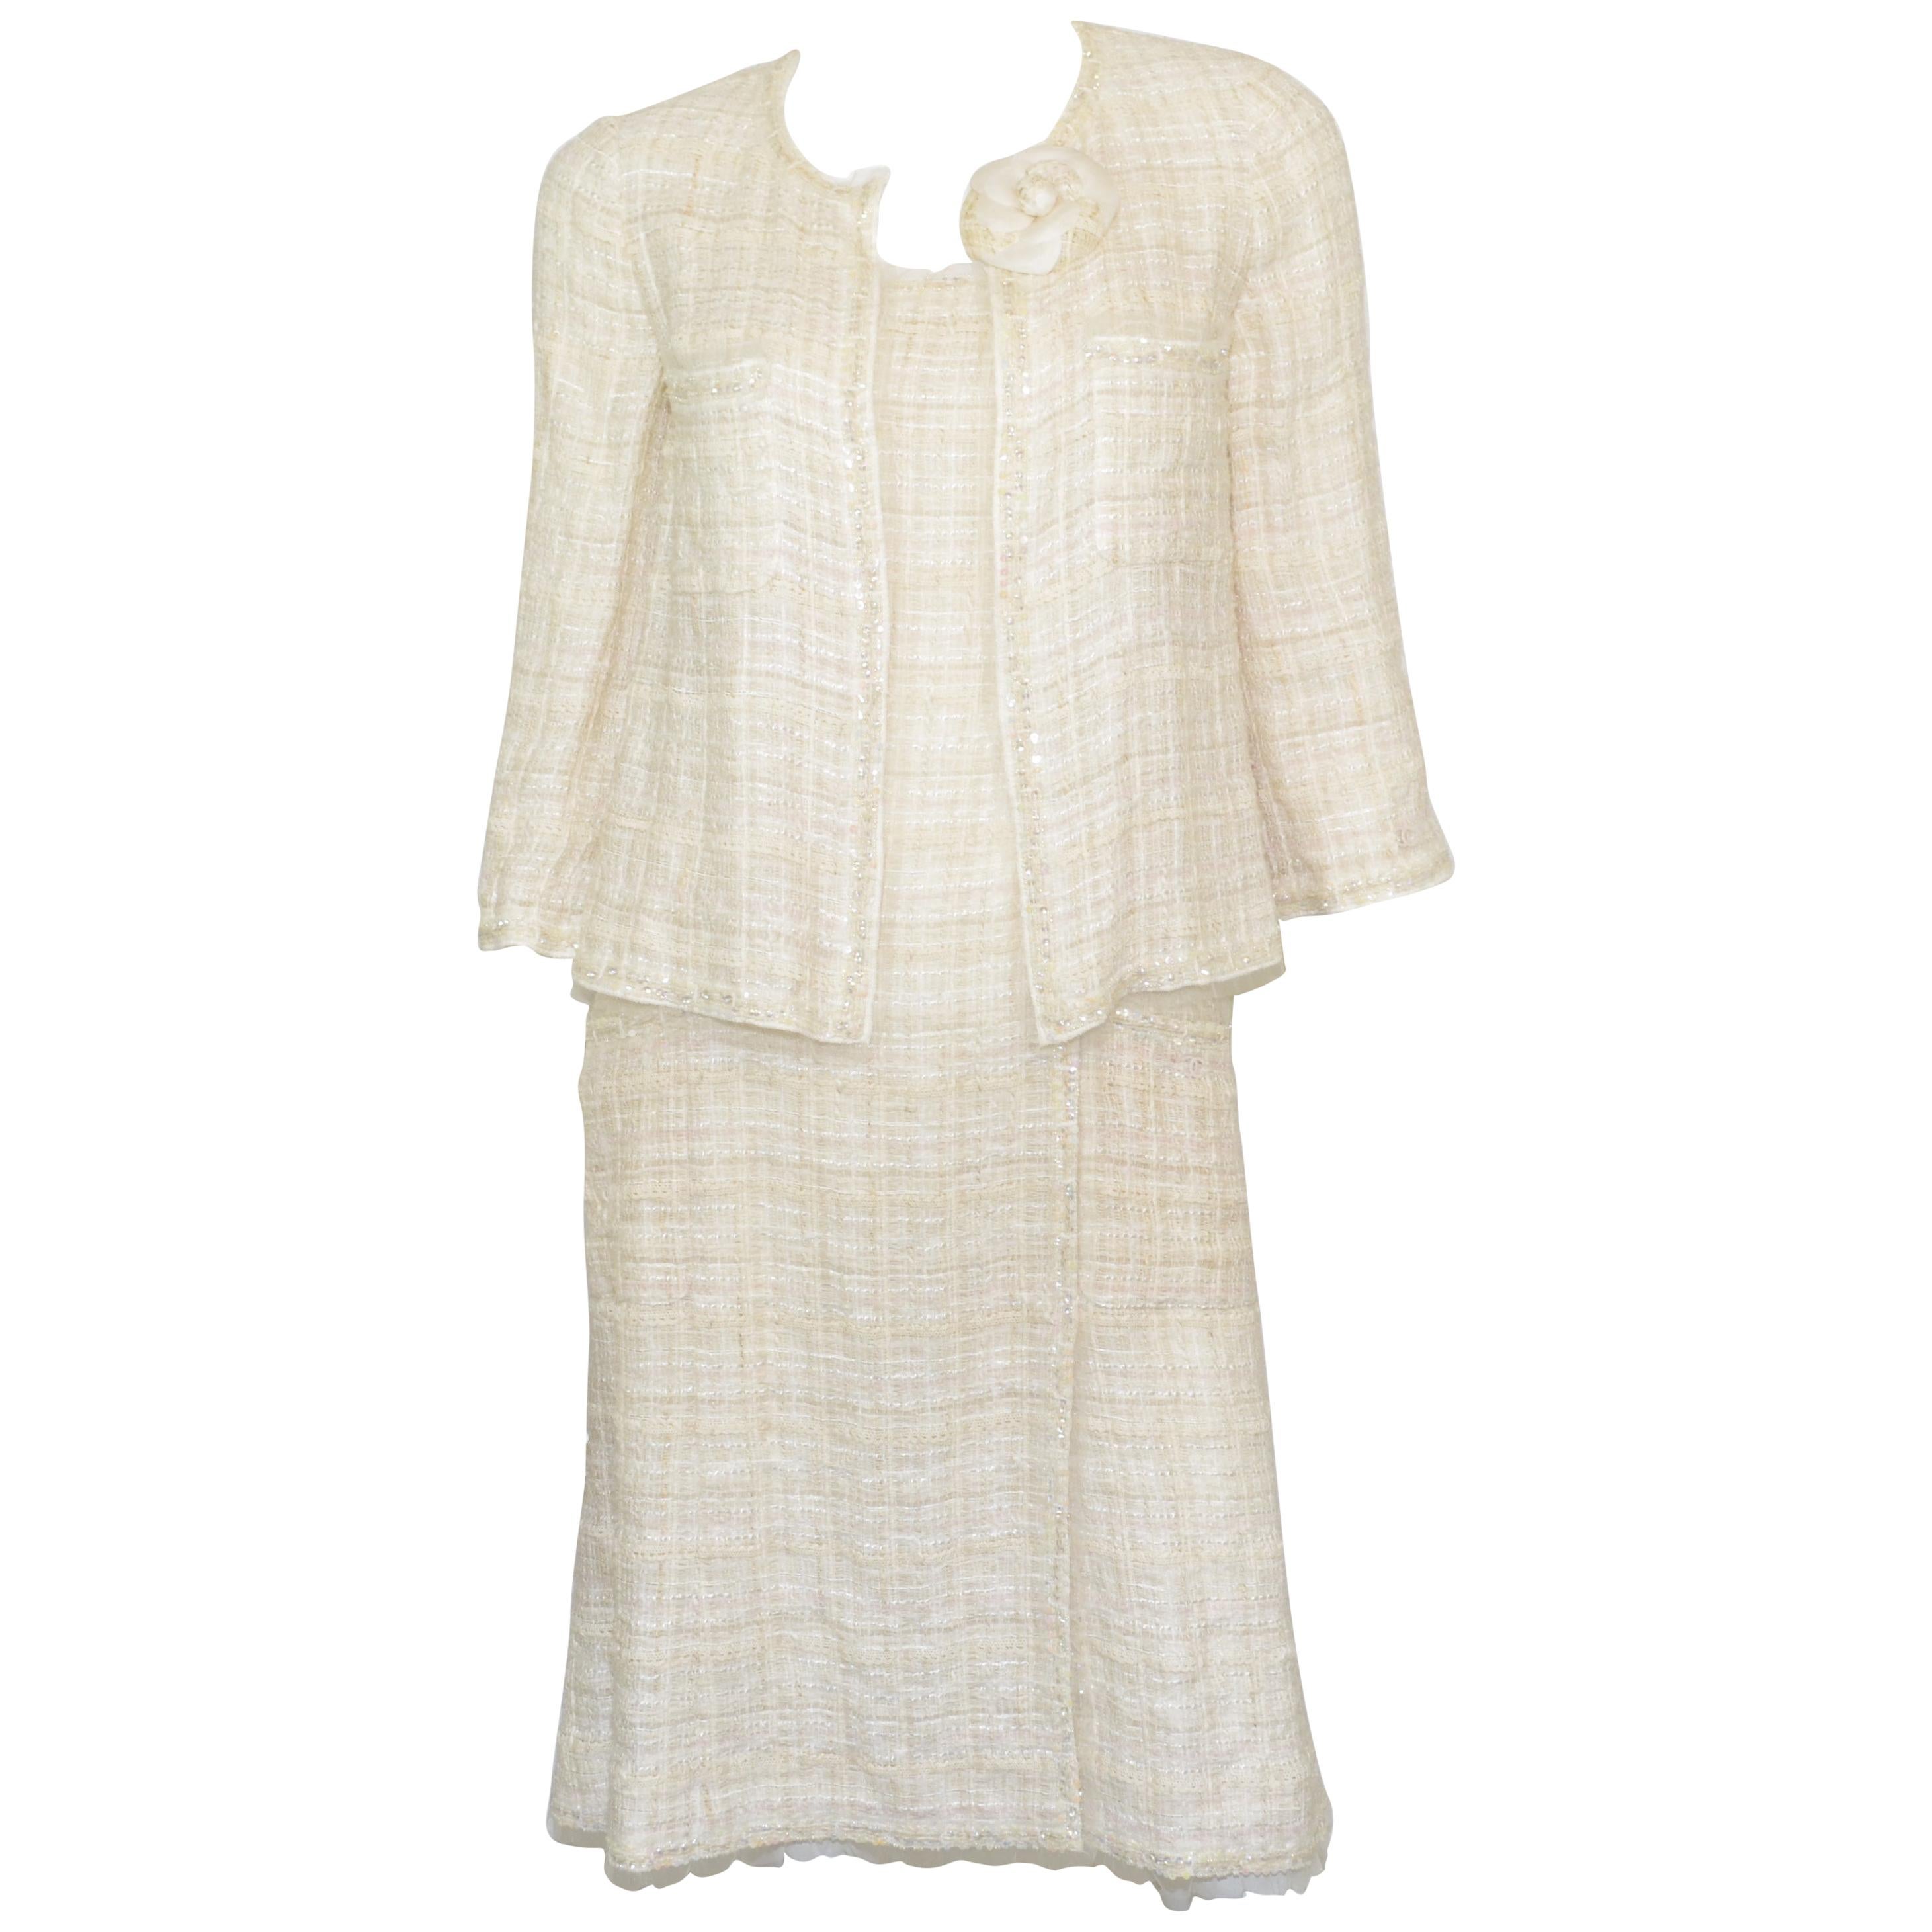 Chanel Ivory Tweed Knit Dress and Jacket Set with Camellia Brooch